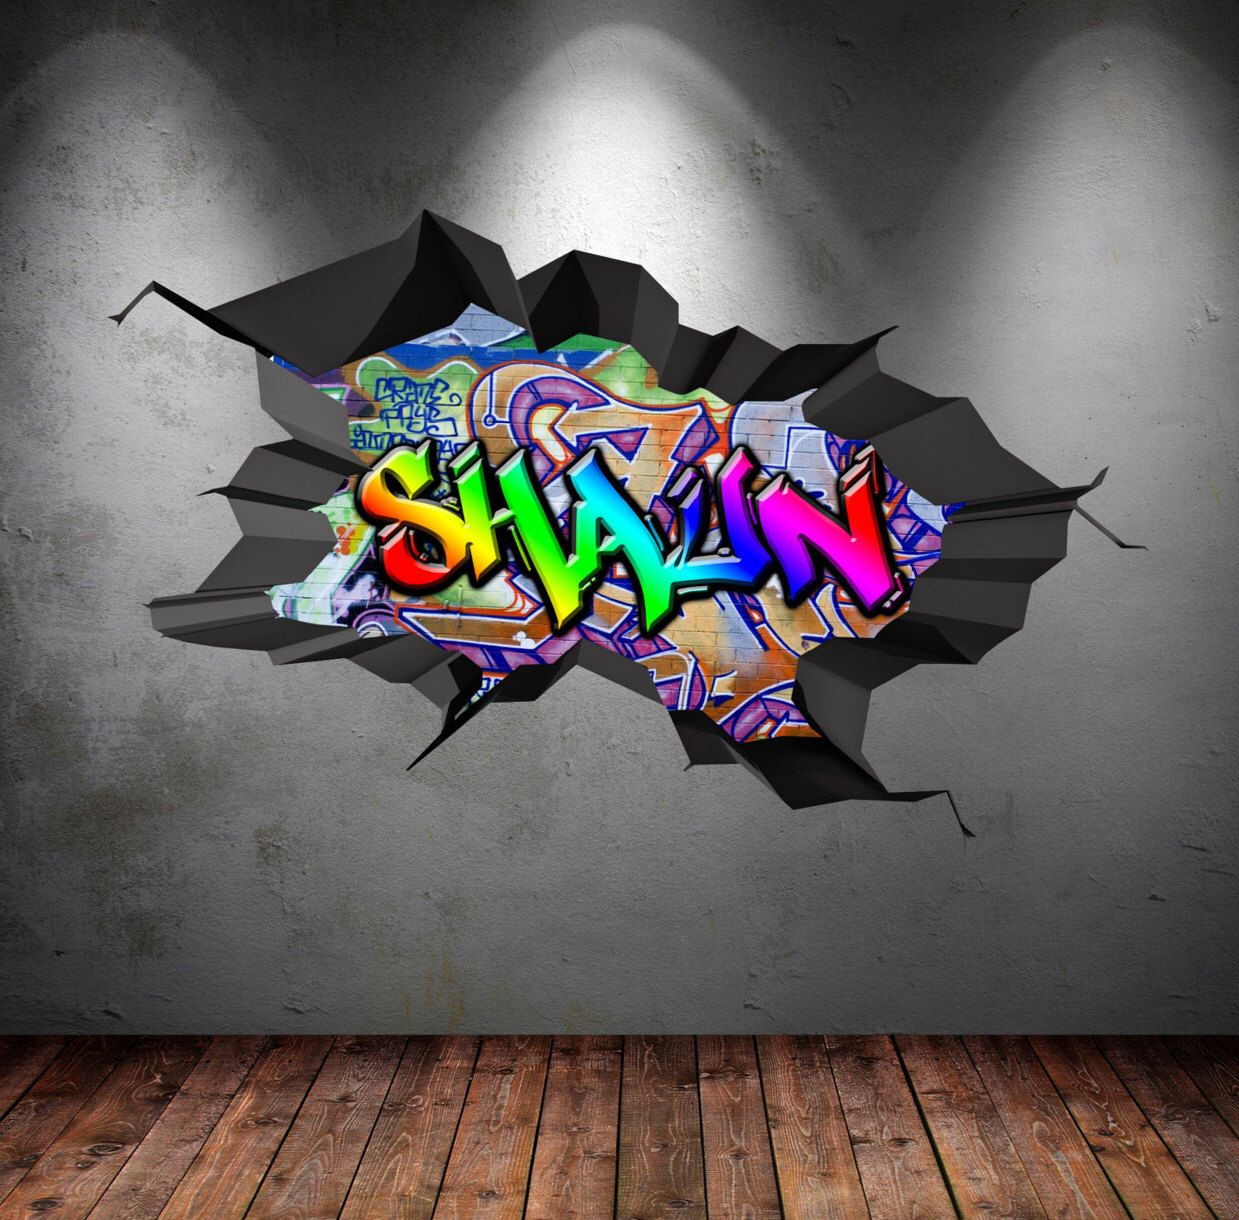 Graffiti Bedroom Wall
 Personalised Name Full Colour Graffiti Wall Decals Cracked